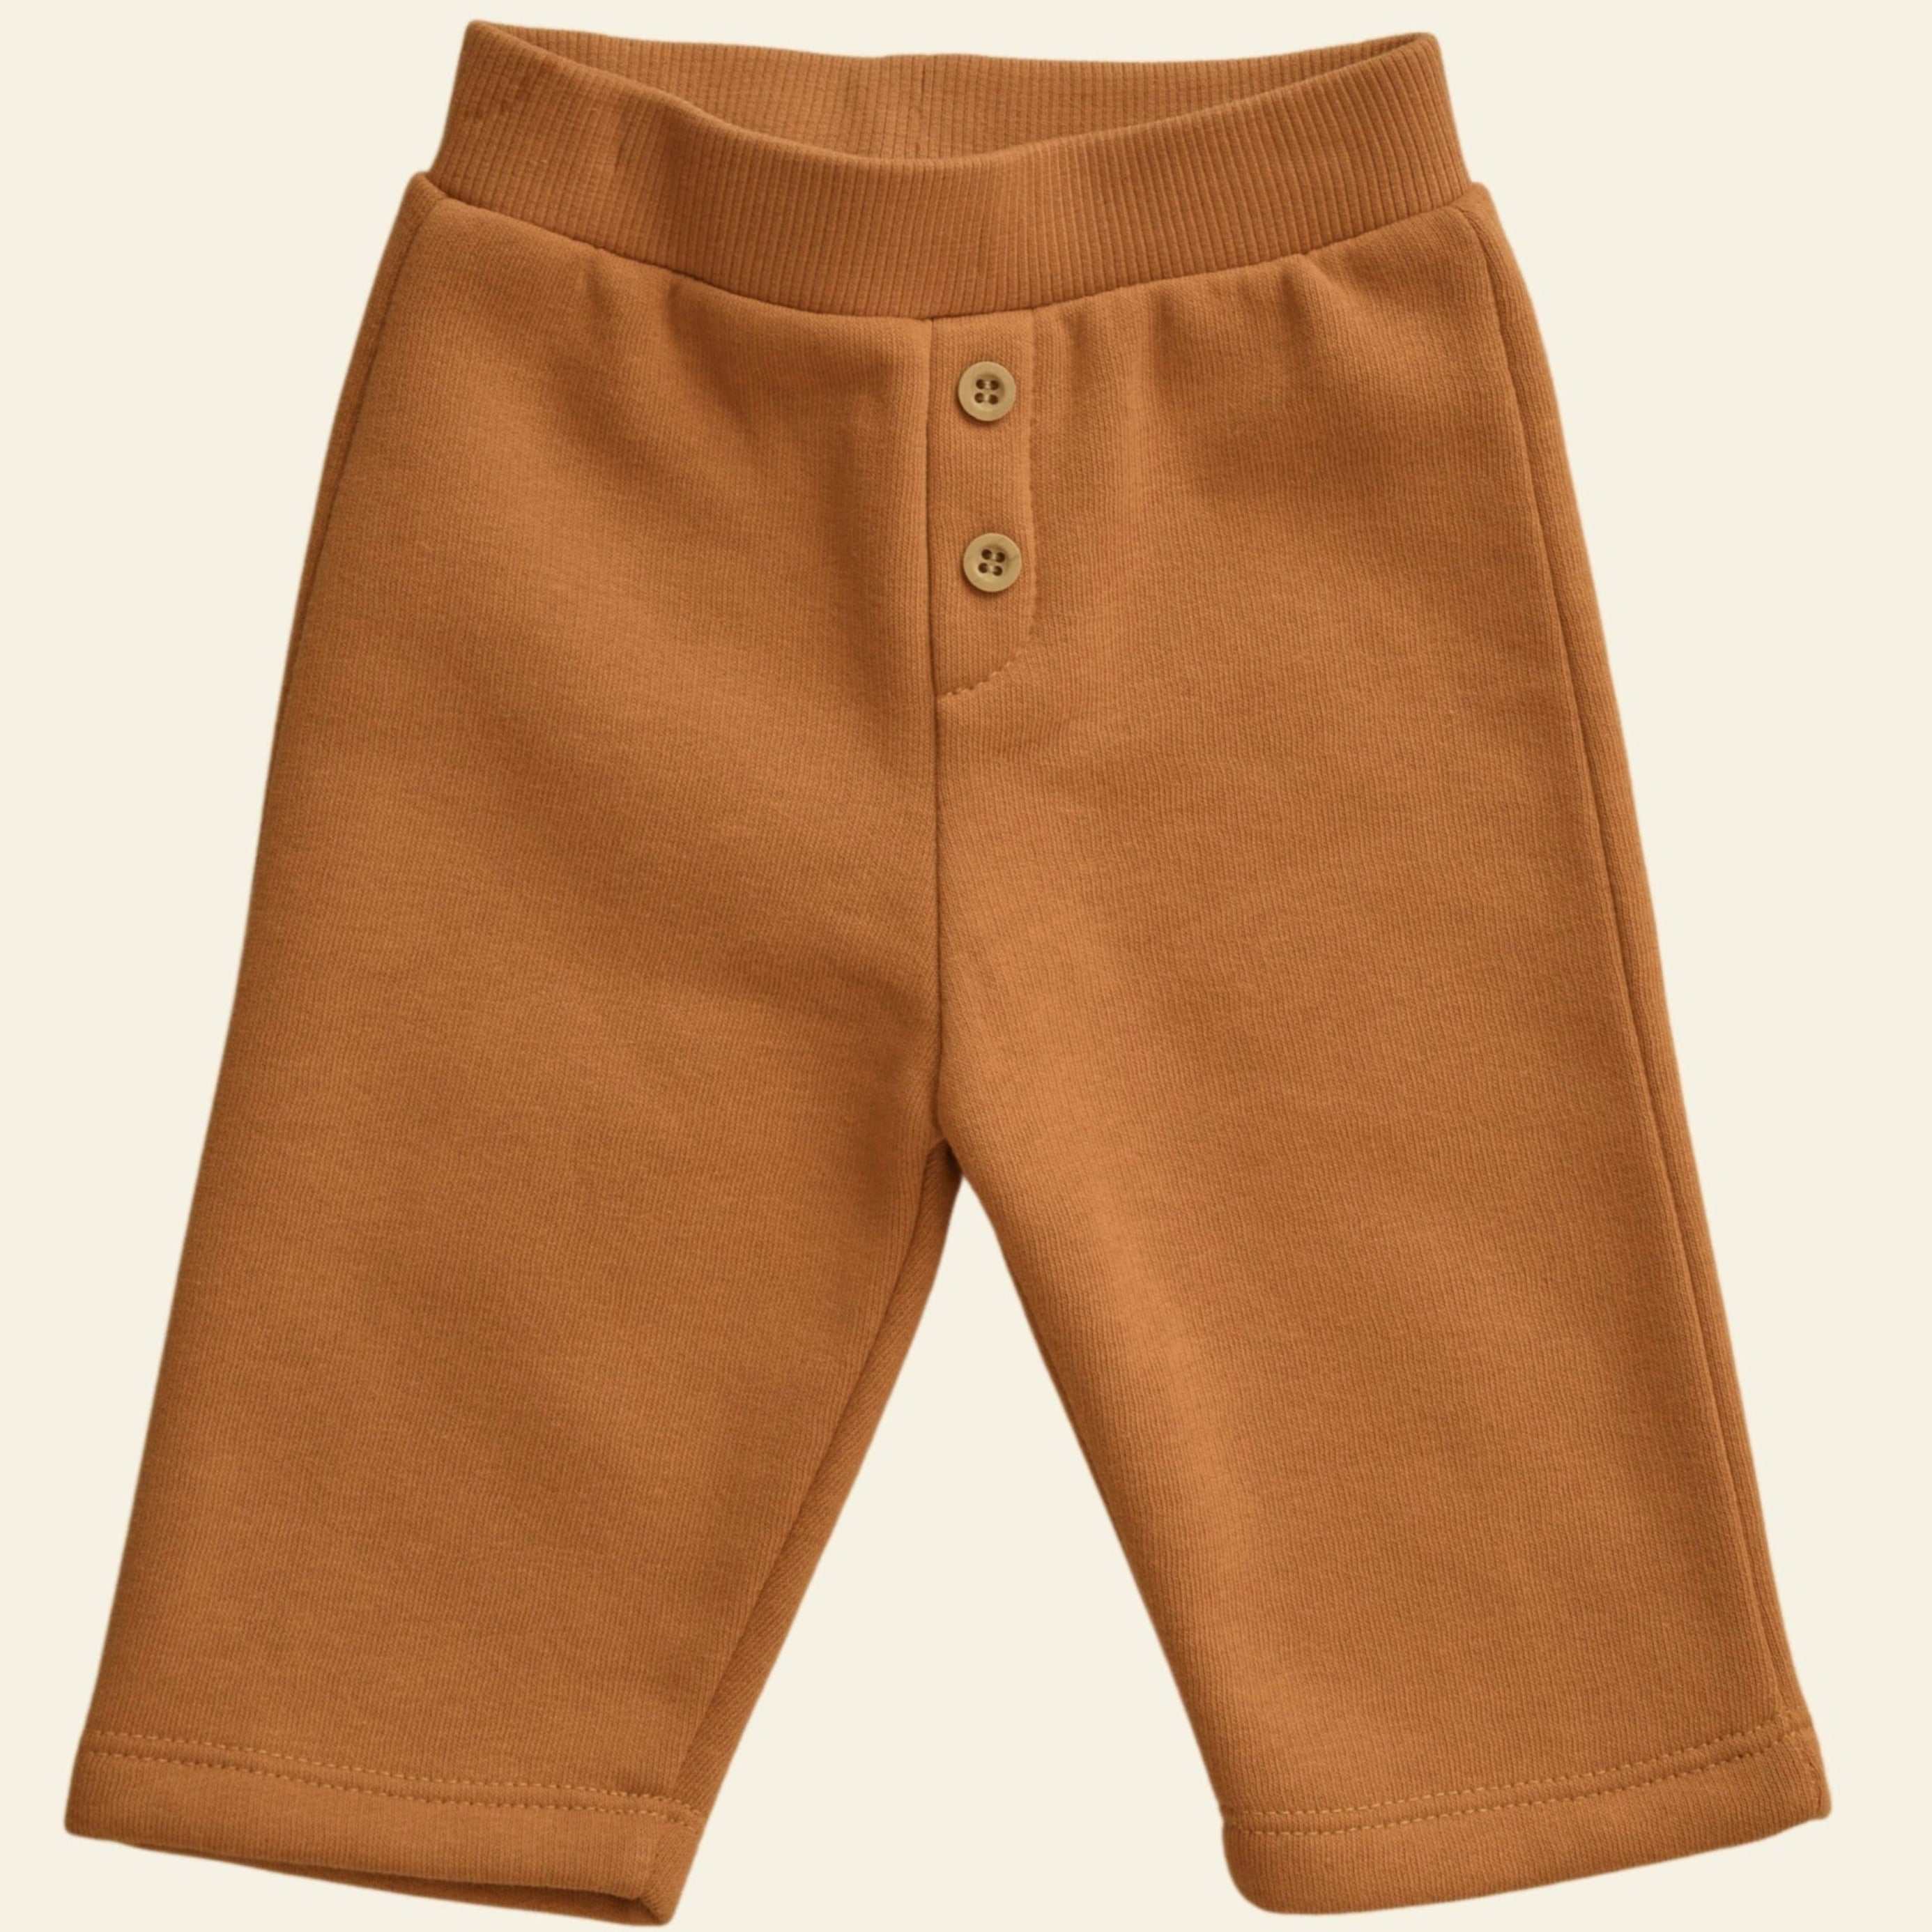 Eli & Nev / Cotton Baby Pants for Babies and Kids 1y - 5Y 3-4 Year 1y - 5Y 3-4 Year